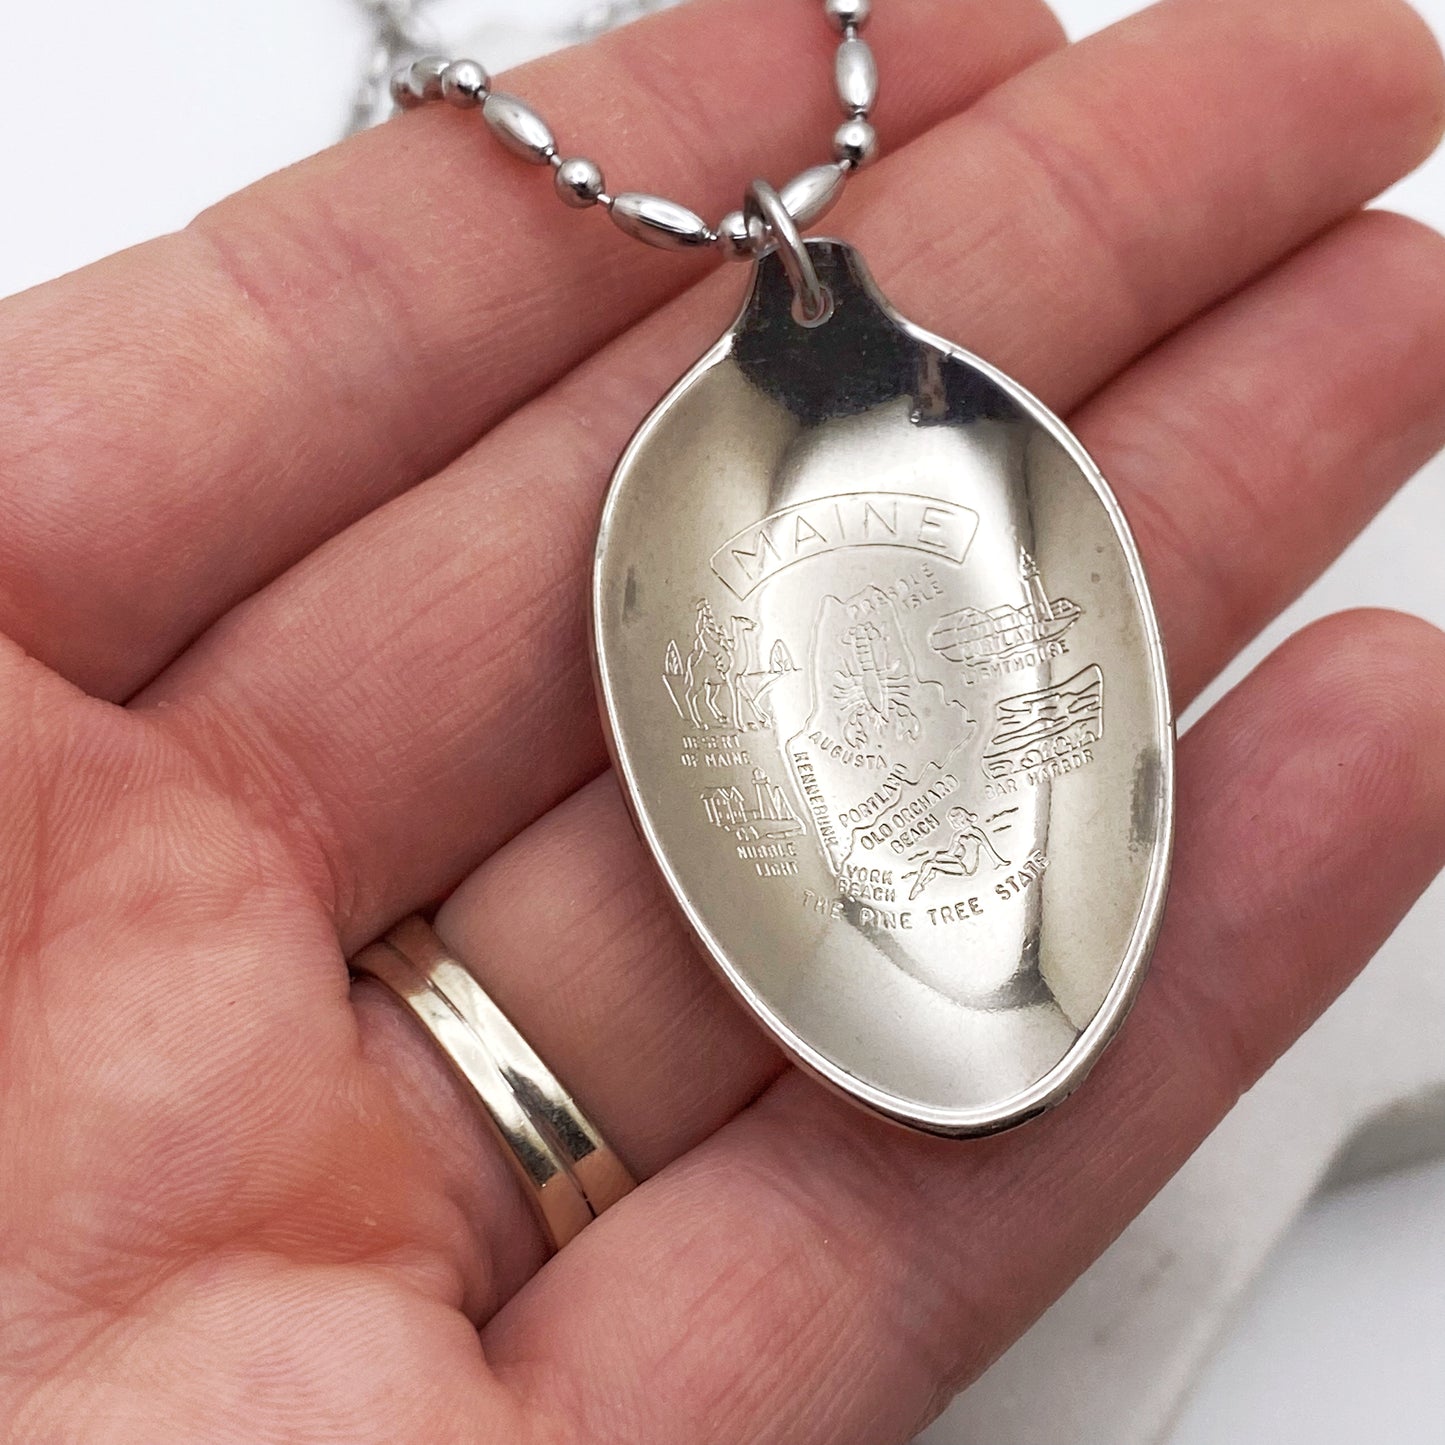 Maine Pendant, United States Jewelry, Reclaimed Collector's Spoon Necklace, Vintage Souvenir Spoon Jewelry Necklaces callistafaye   